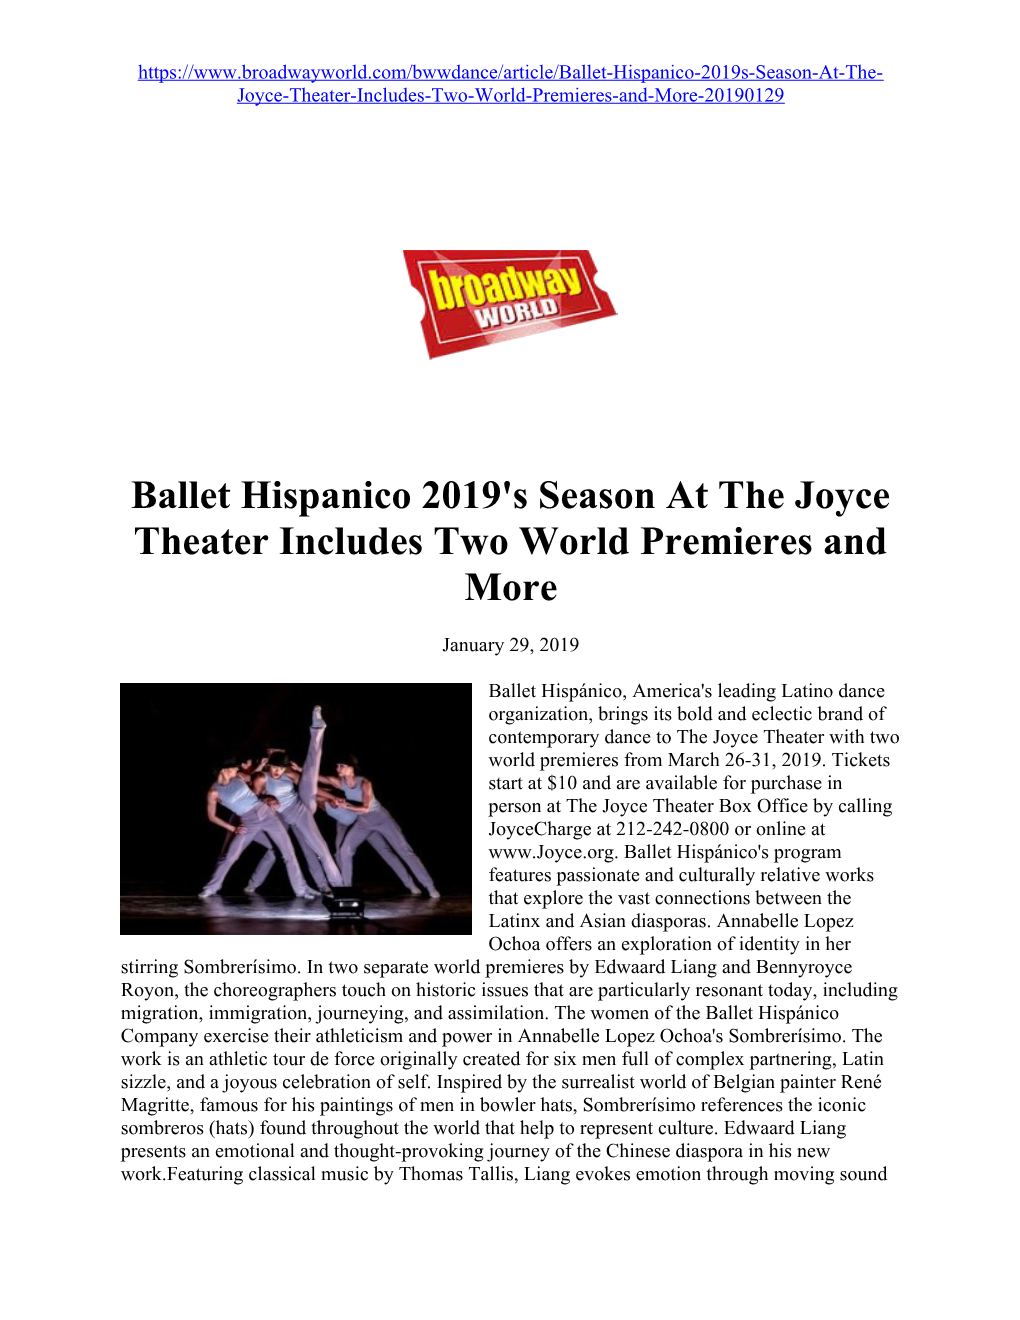 Ballet Hispanico 2019'S Season at the Joyce Theater Includes Two World Premieres and More